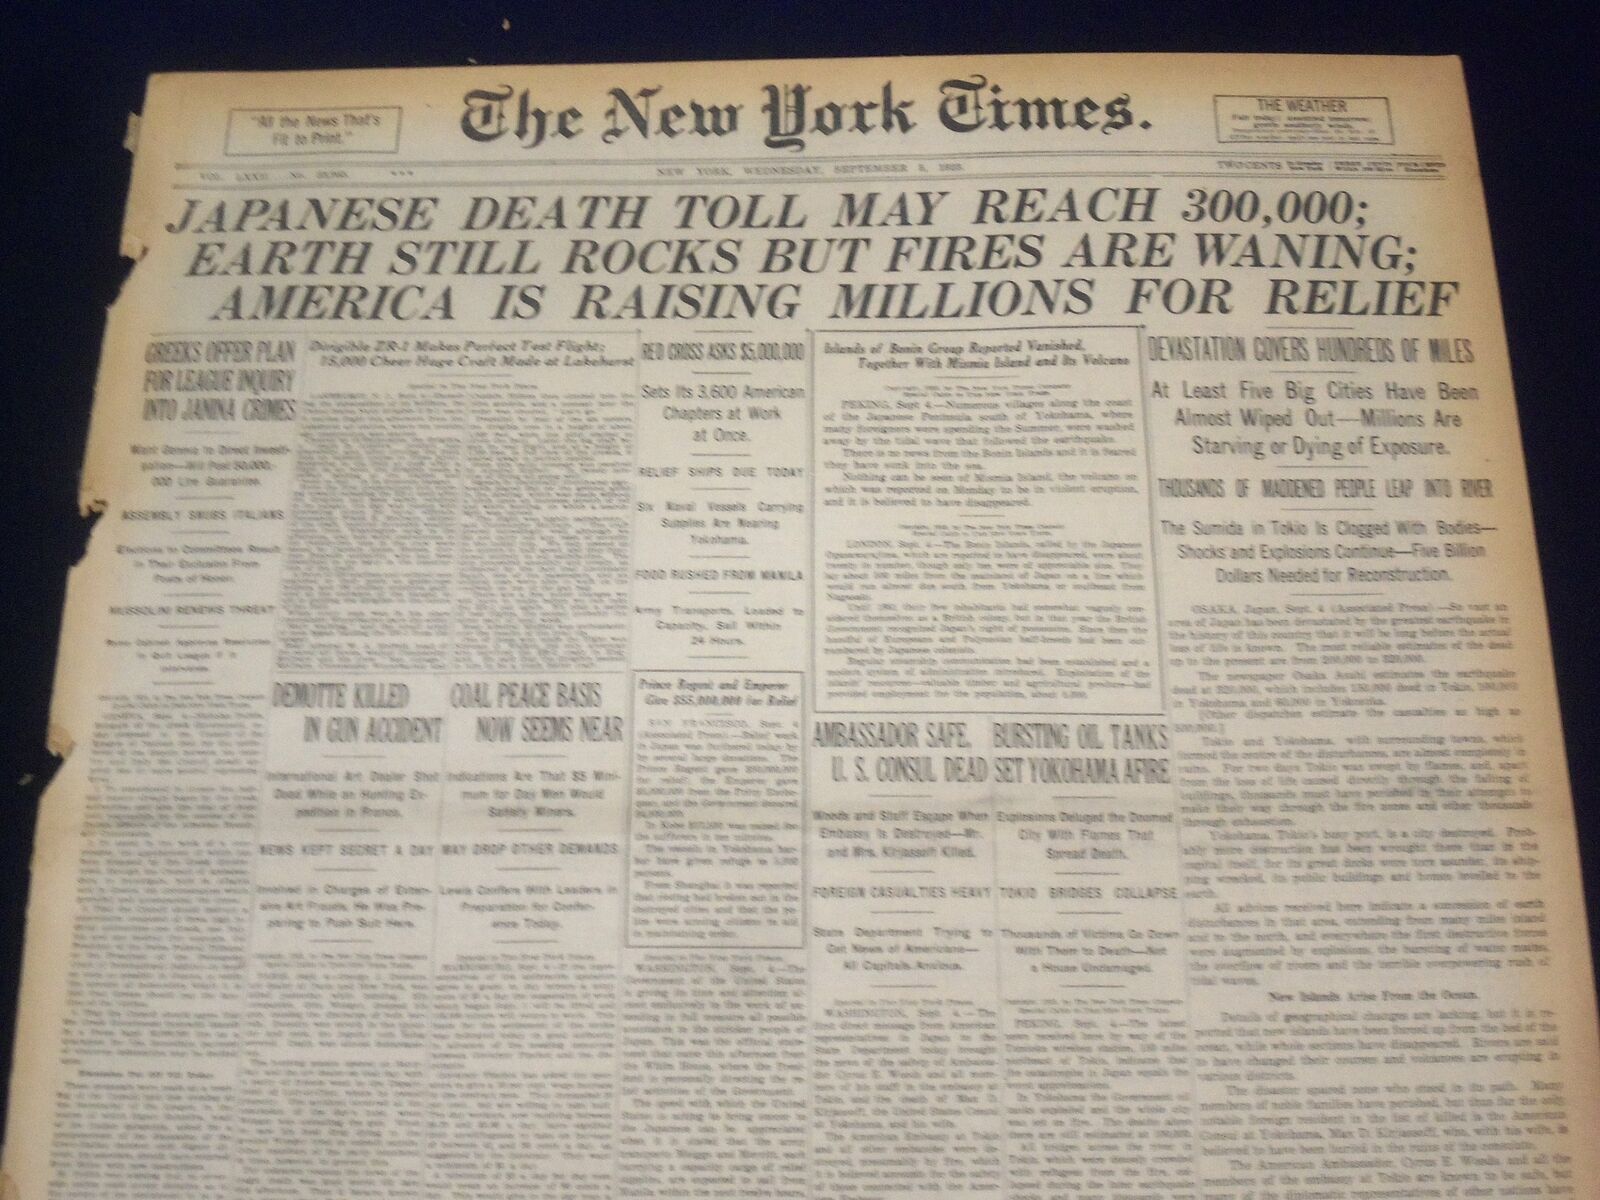 1923 SEP 5 NEW YORK TIMES - JAPANESE DEATH TOLL MAY REACH 300,000 - NT 9349